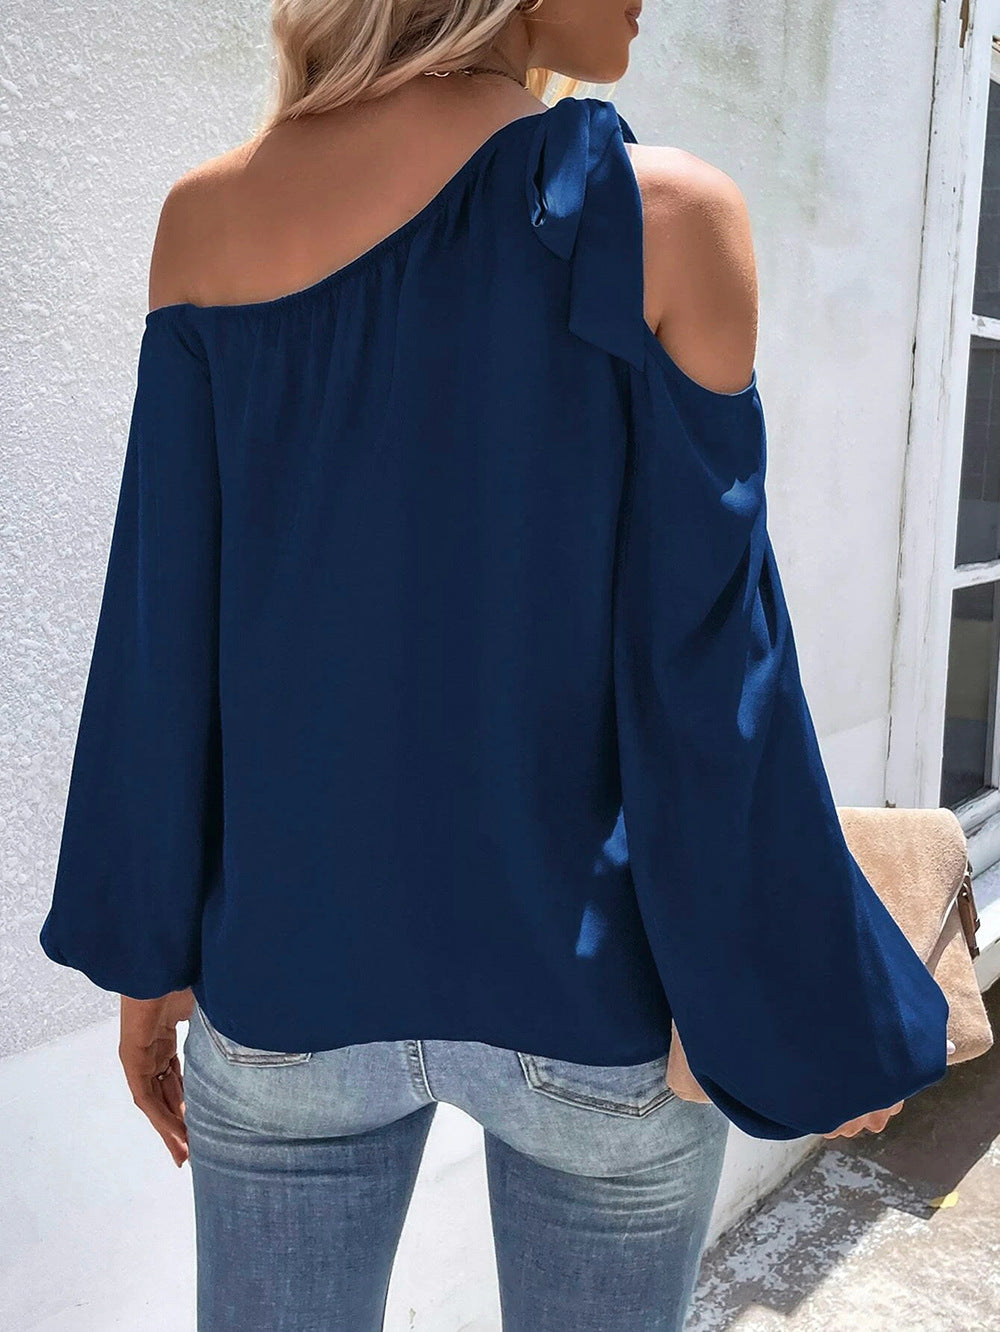 Women Shirt Spring Summer Chiffon off the Shoulder Lace up Loose Office Women Top